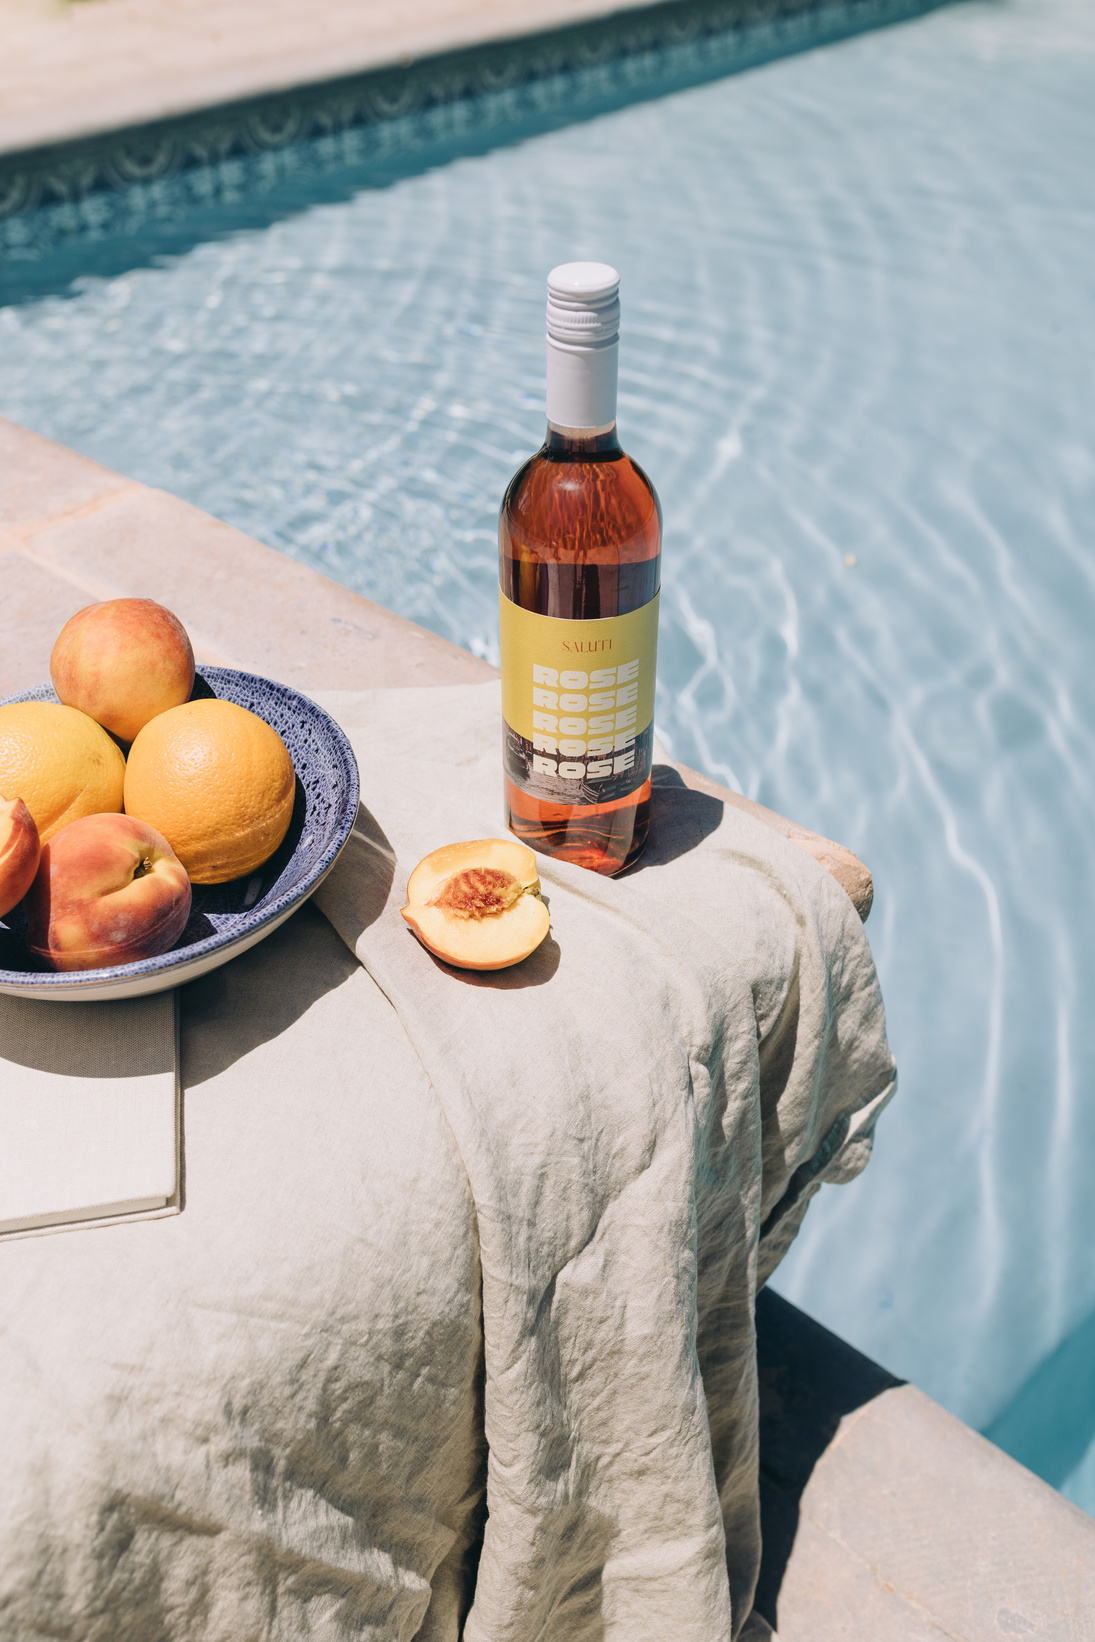 a bottle of wine and a bowl of fruits next to a pool